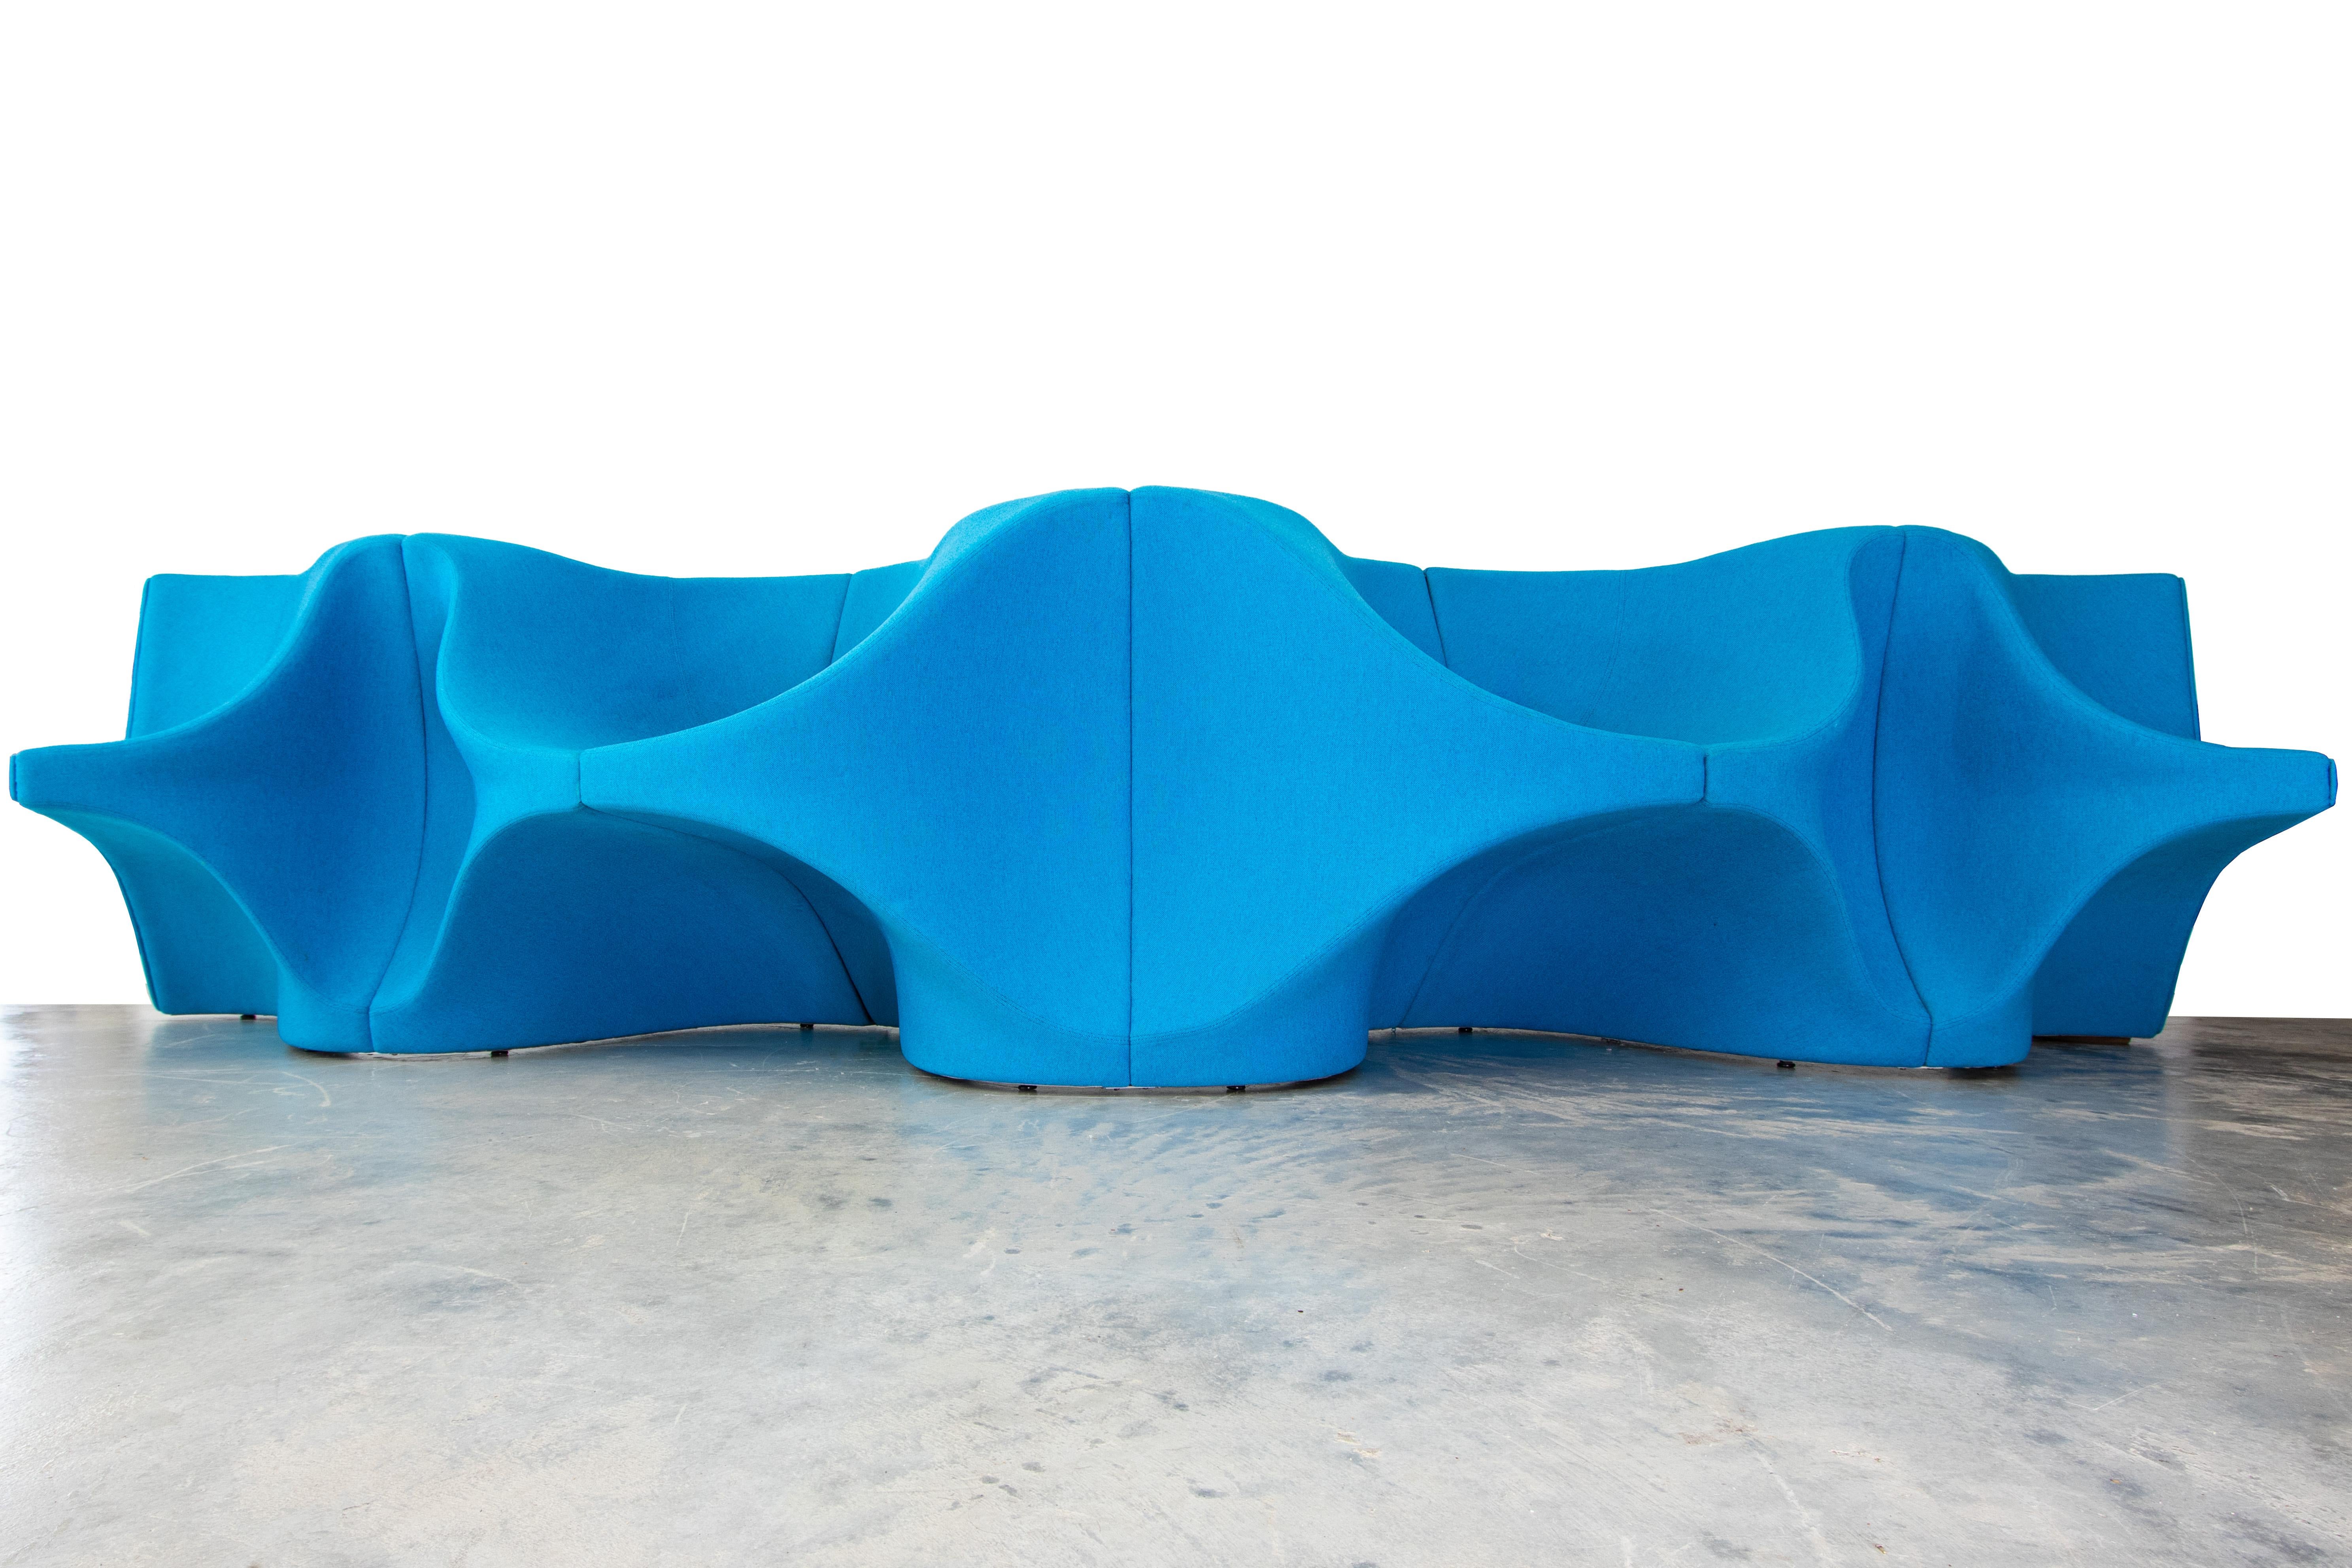 The heartbeat sofa blends sculpture and form. This sofa consists of three individual units (one concave and two convex units) that form a 5 seat sofa three facing one direction and one two seats facing the opposite direction. Made to float in a room